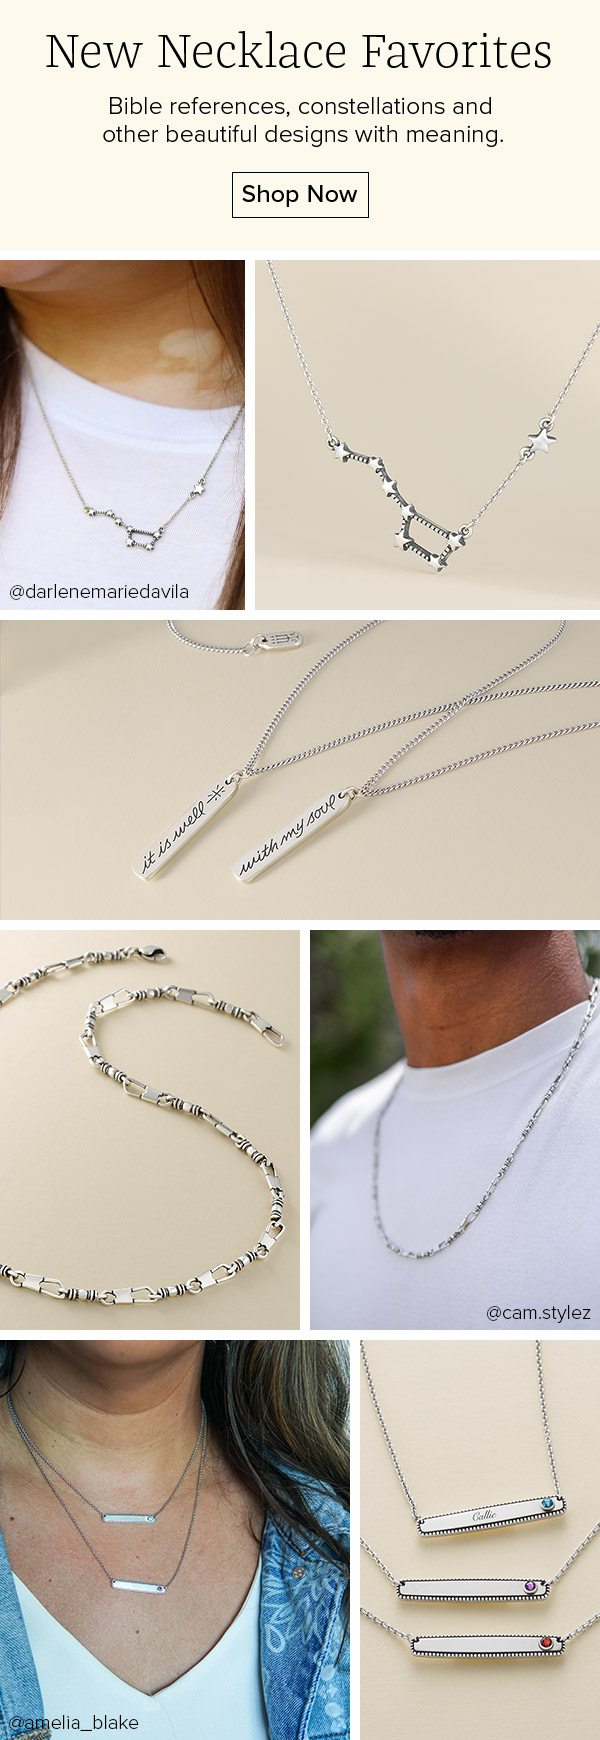 New Necklace Favorites - Bible references, constellations and other beautiful designs with meaning. Shop Now